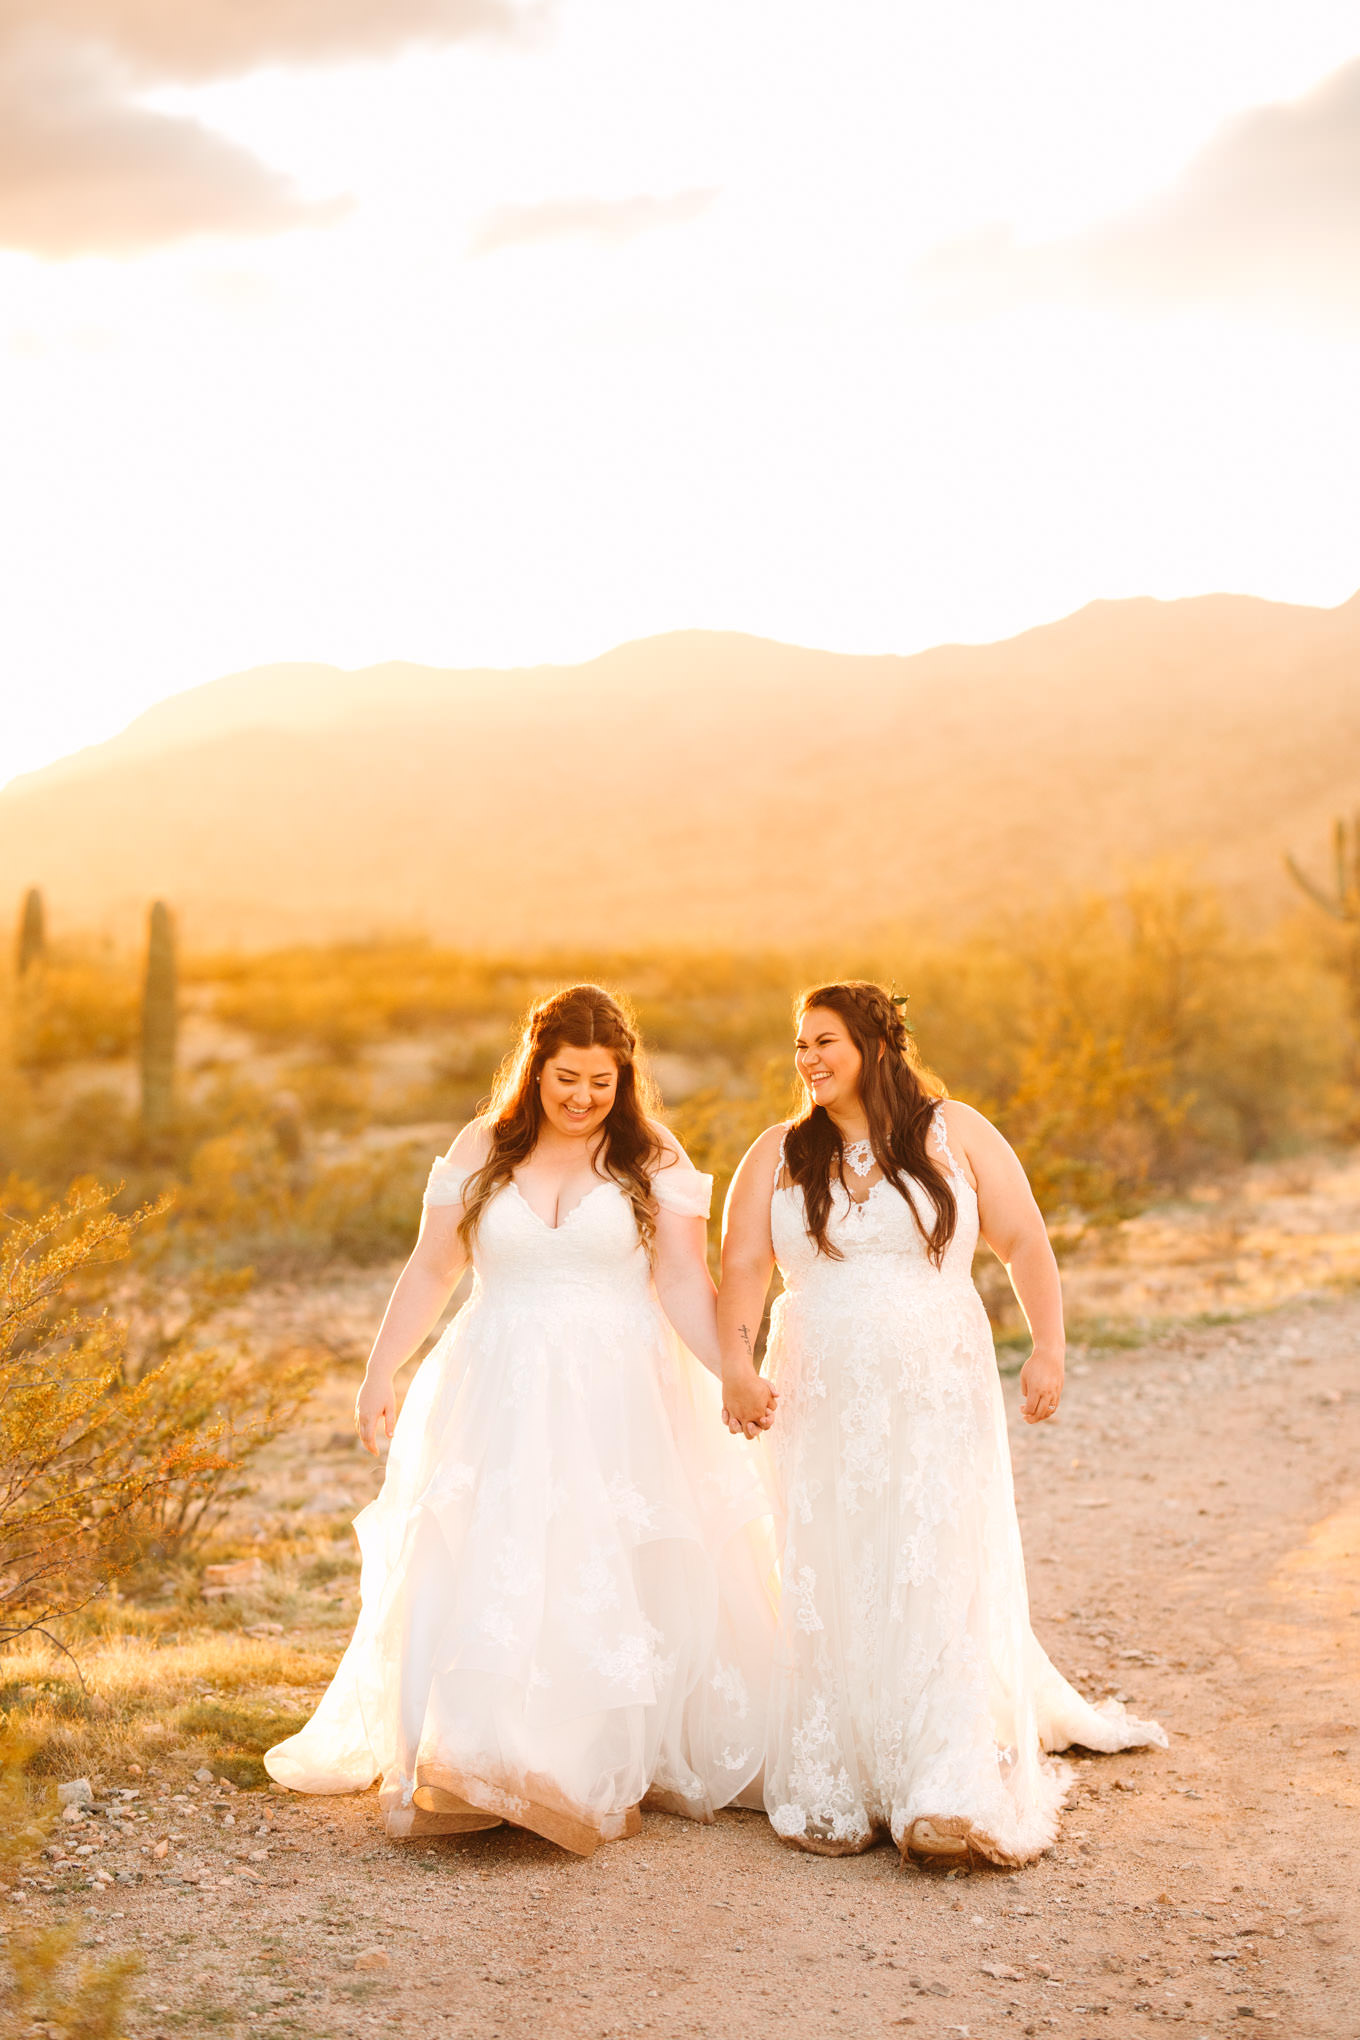 Two brides walking and laughing at sunset | Engagement, elopement, and wedding photography roundup of Mary Costa’s favorite images from 2020 | Colorful and elevated photography for fun-loving couples in Southern California | #2020wedding #elopement #weddingphoto #weddingphotography   Source: Mary Costa Photography | Los Angeles